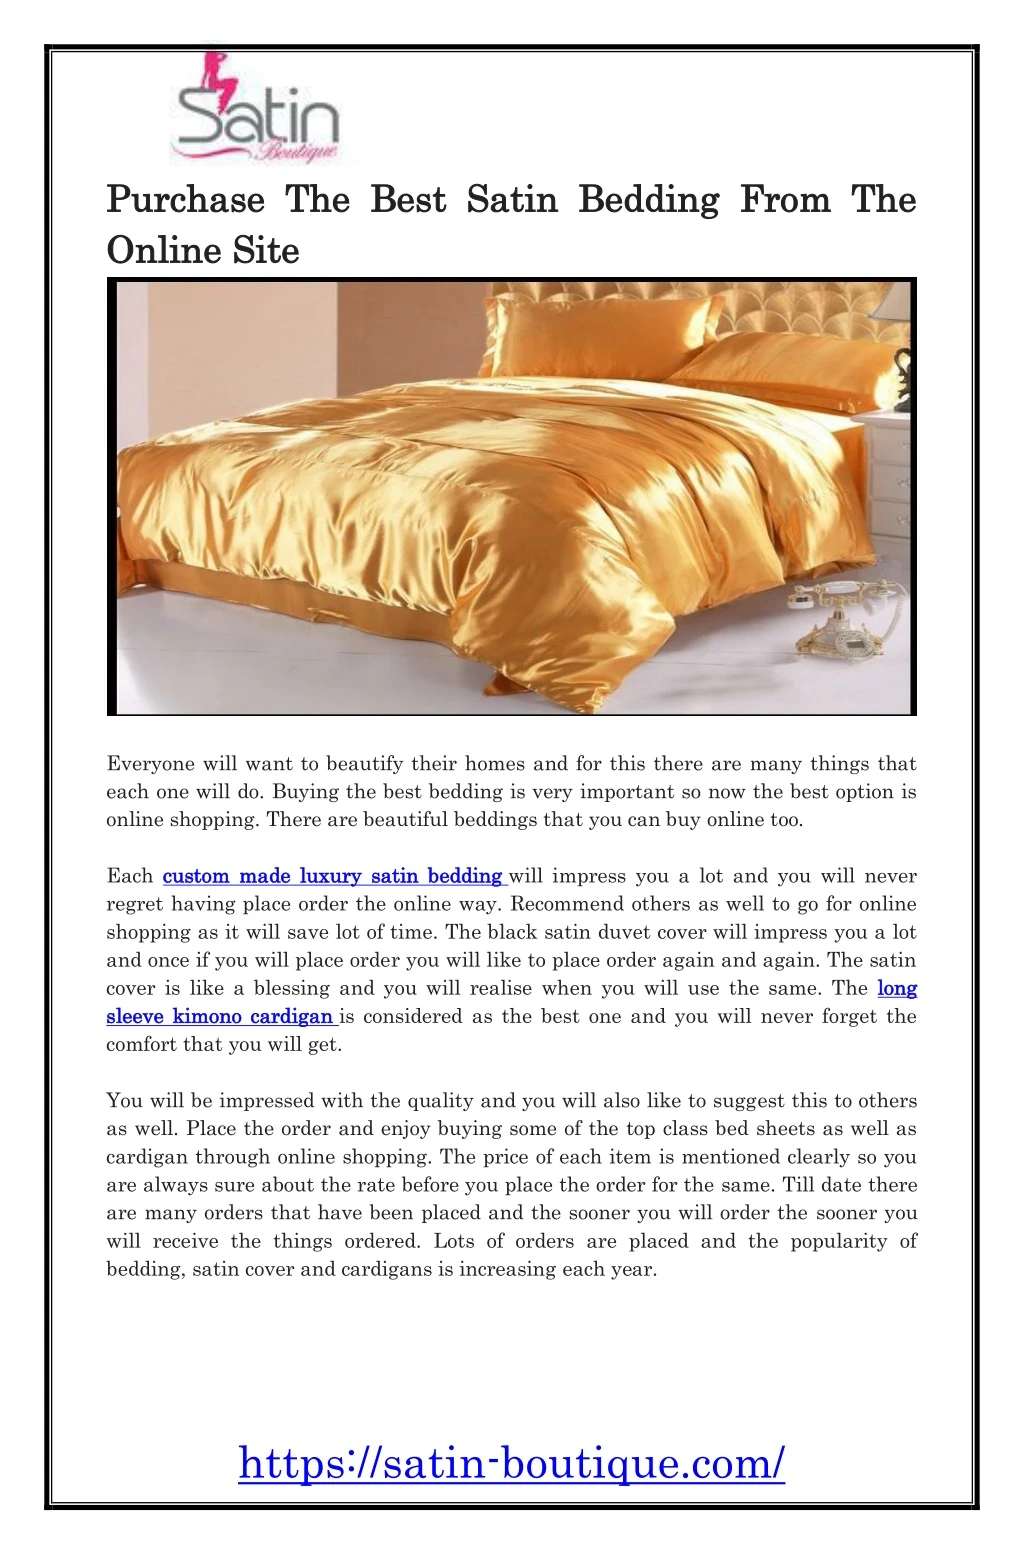 purchase purchase the best satin bedding from